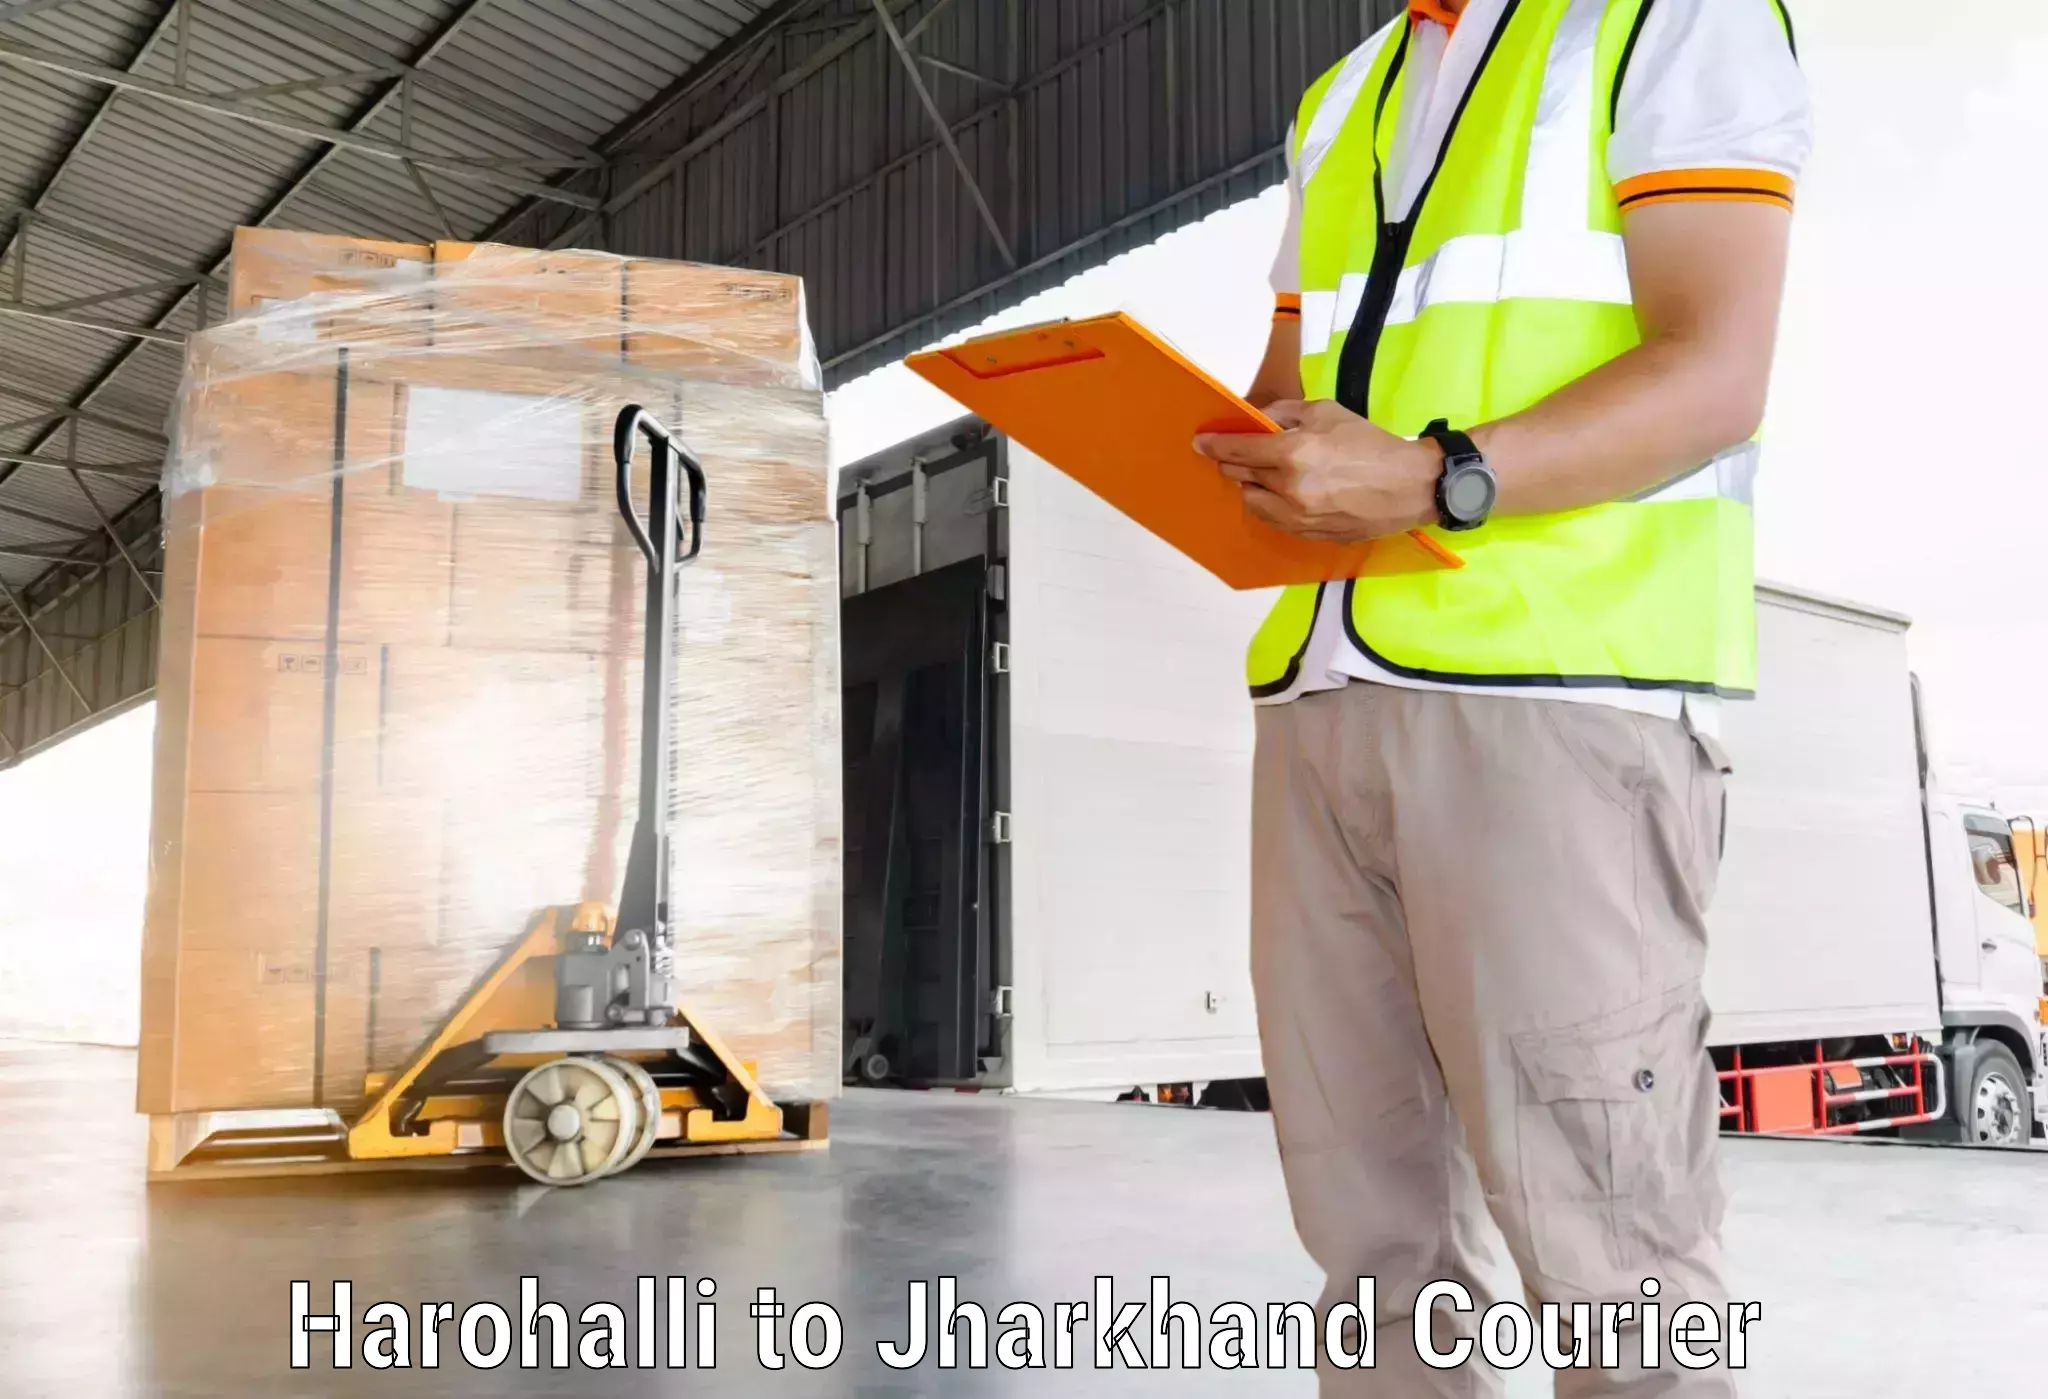 On-demand shipping options in Harohalli to Peterbar